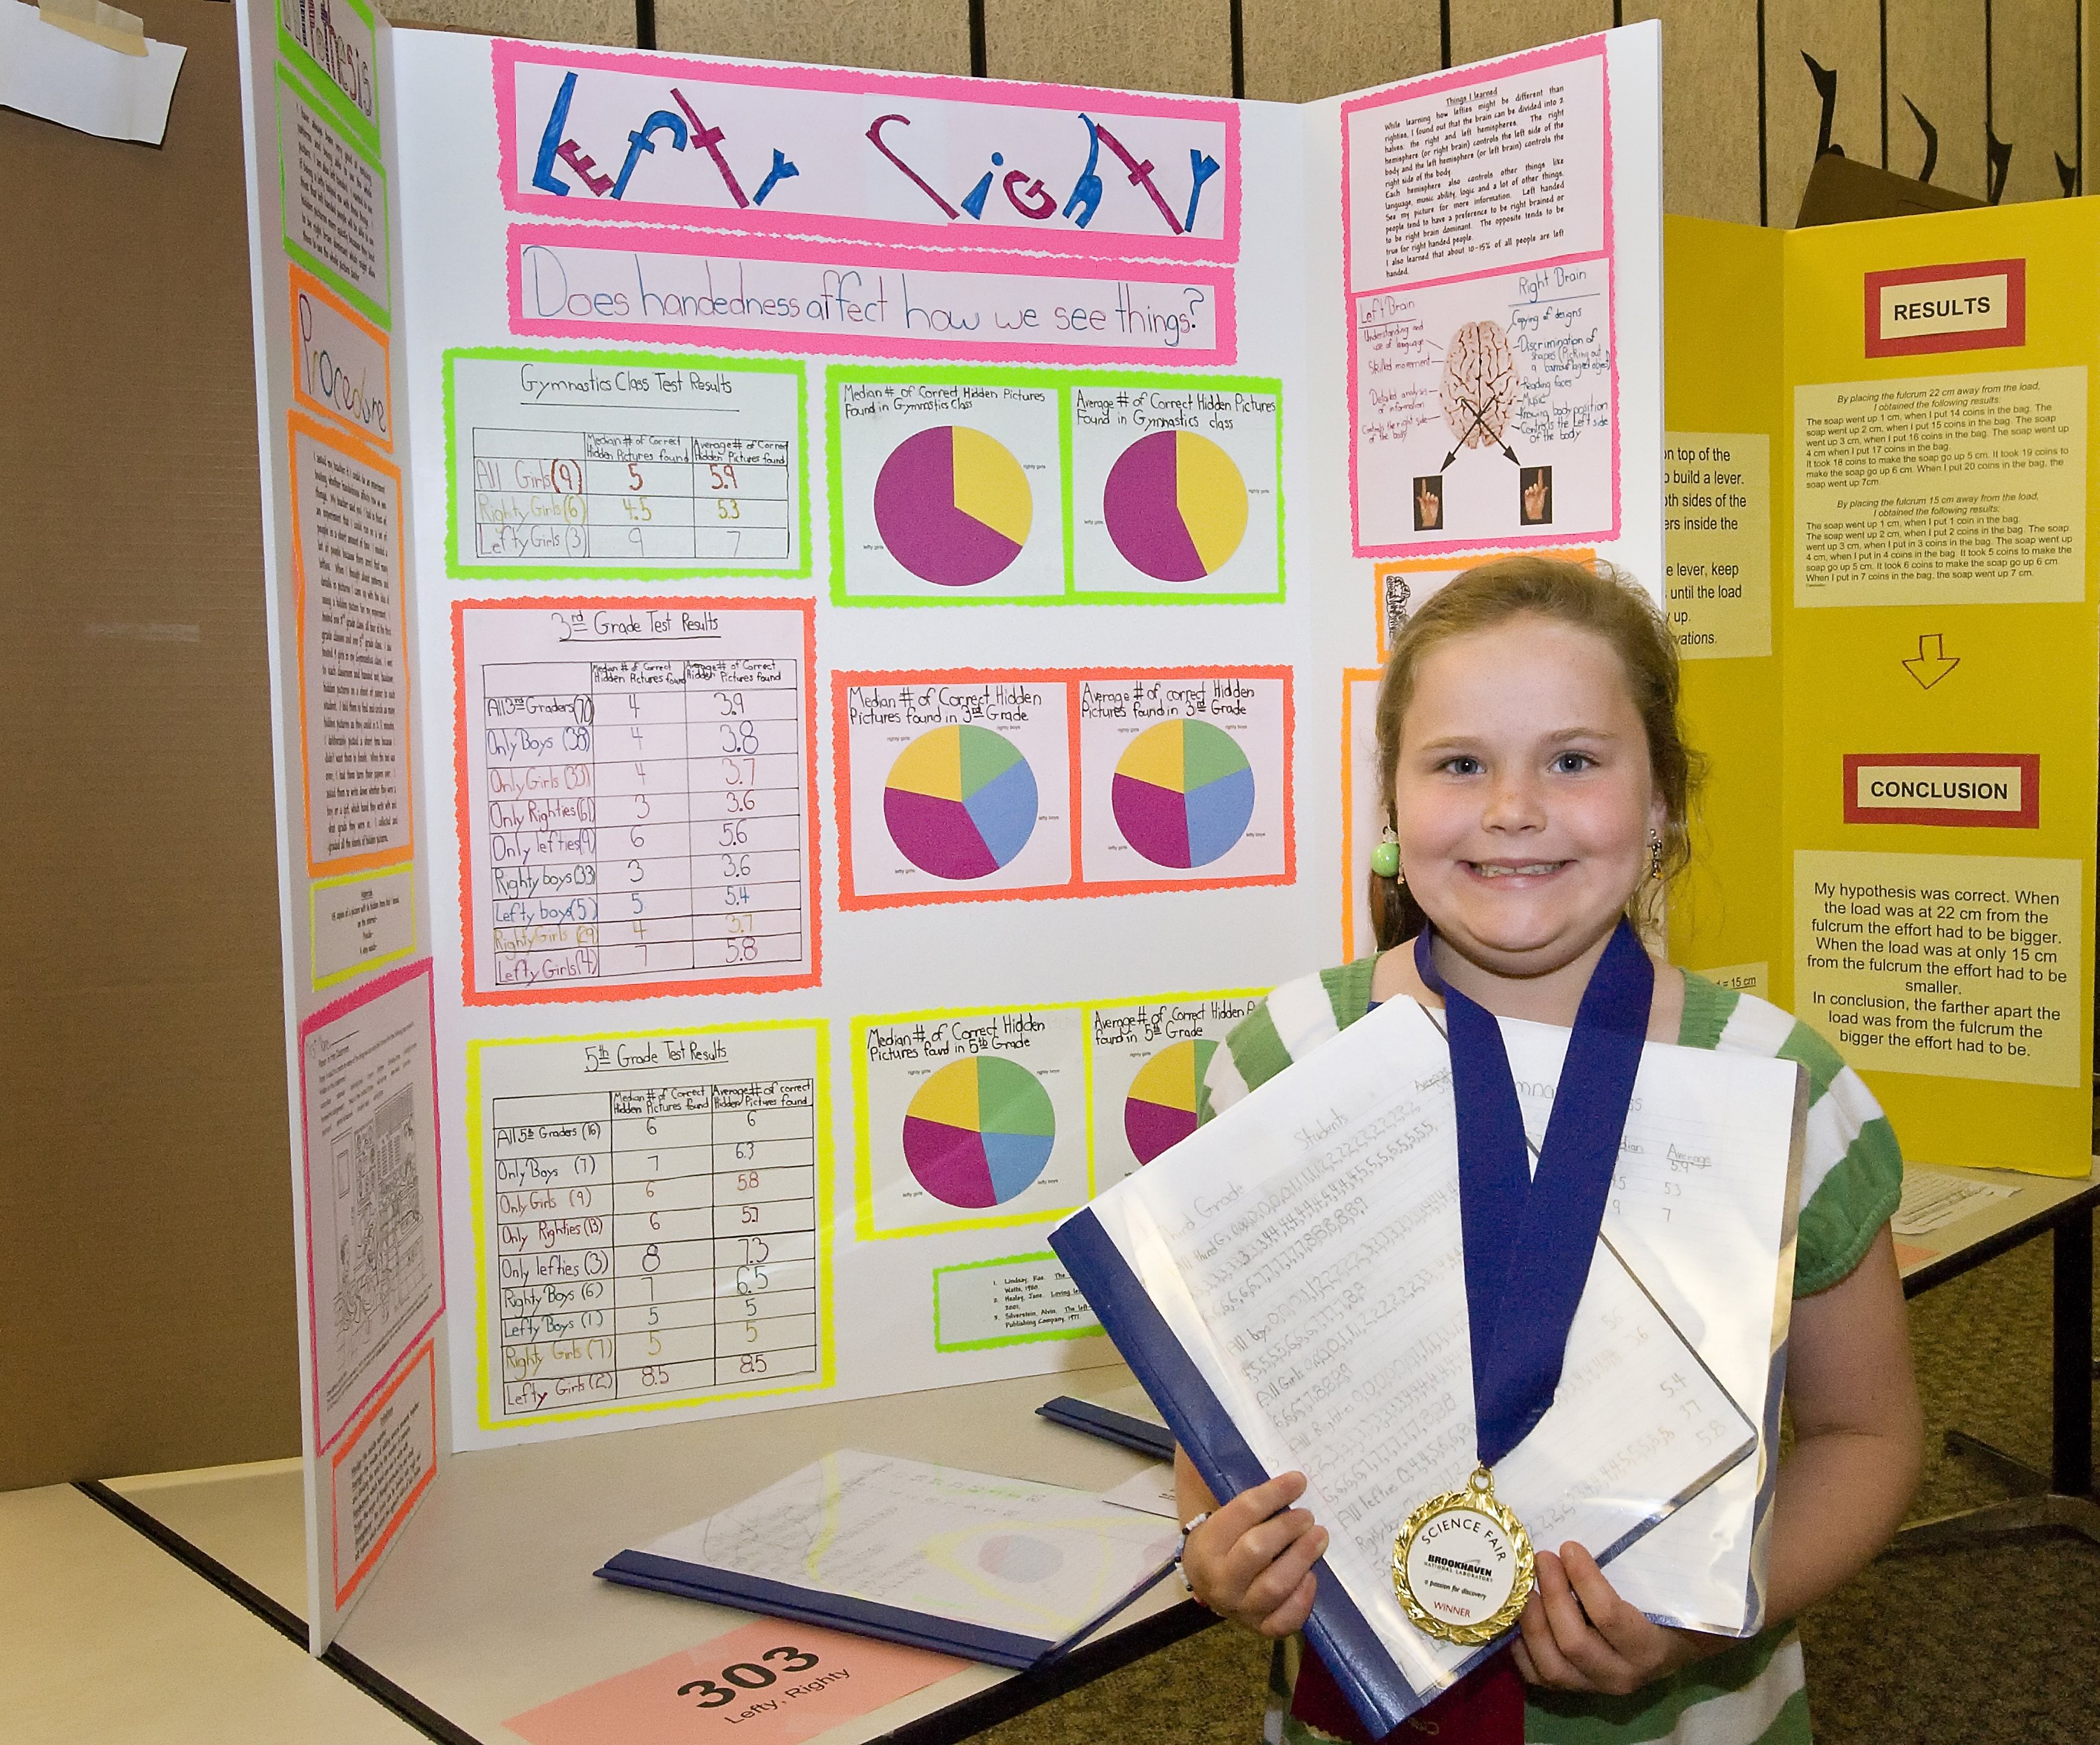 10 Amazing Ideas For Science Fair Projects For 6Th Grade from ant control to wind energy winning projects at brookhaven 6 2022